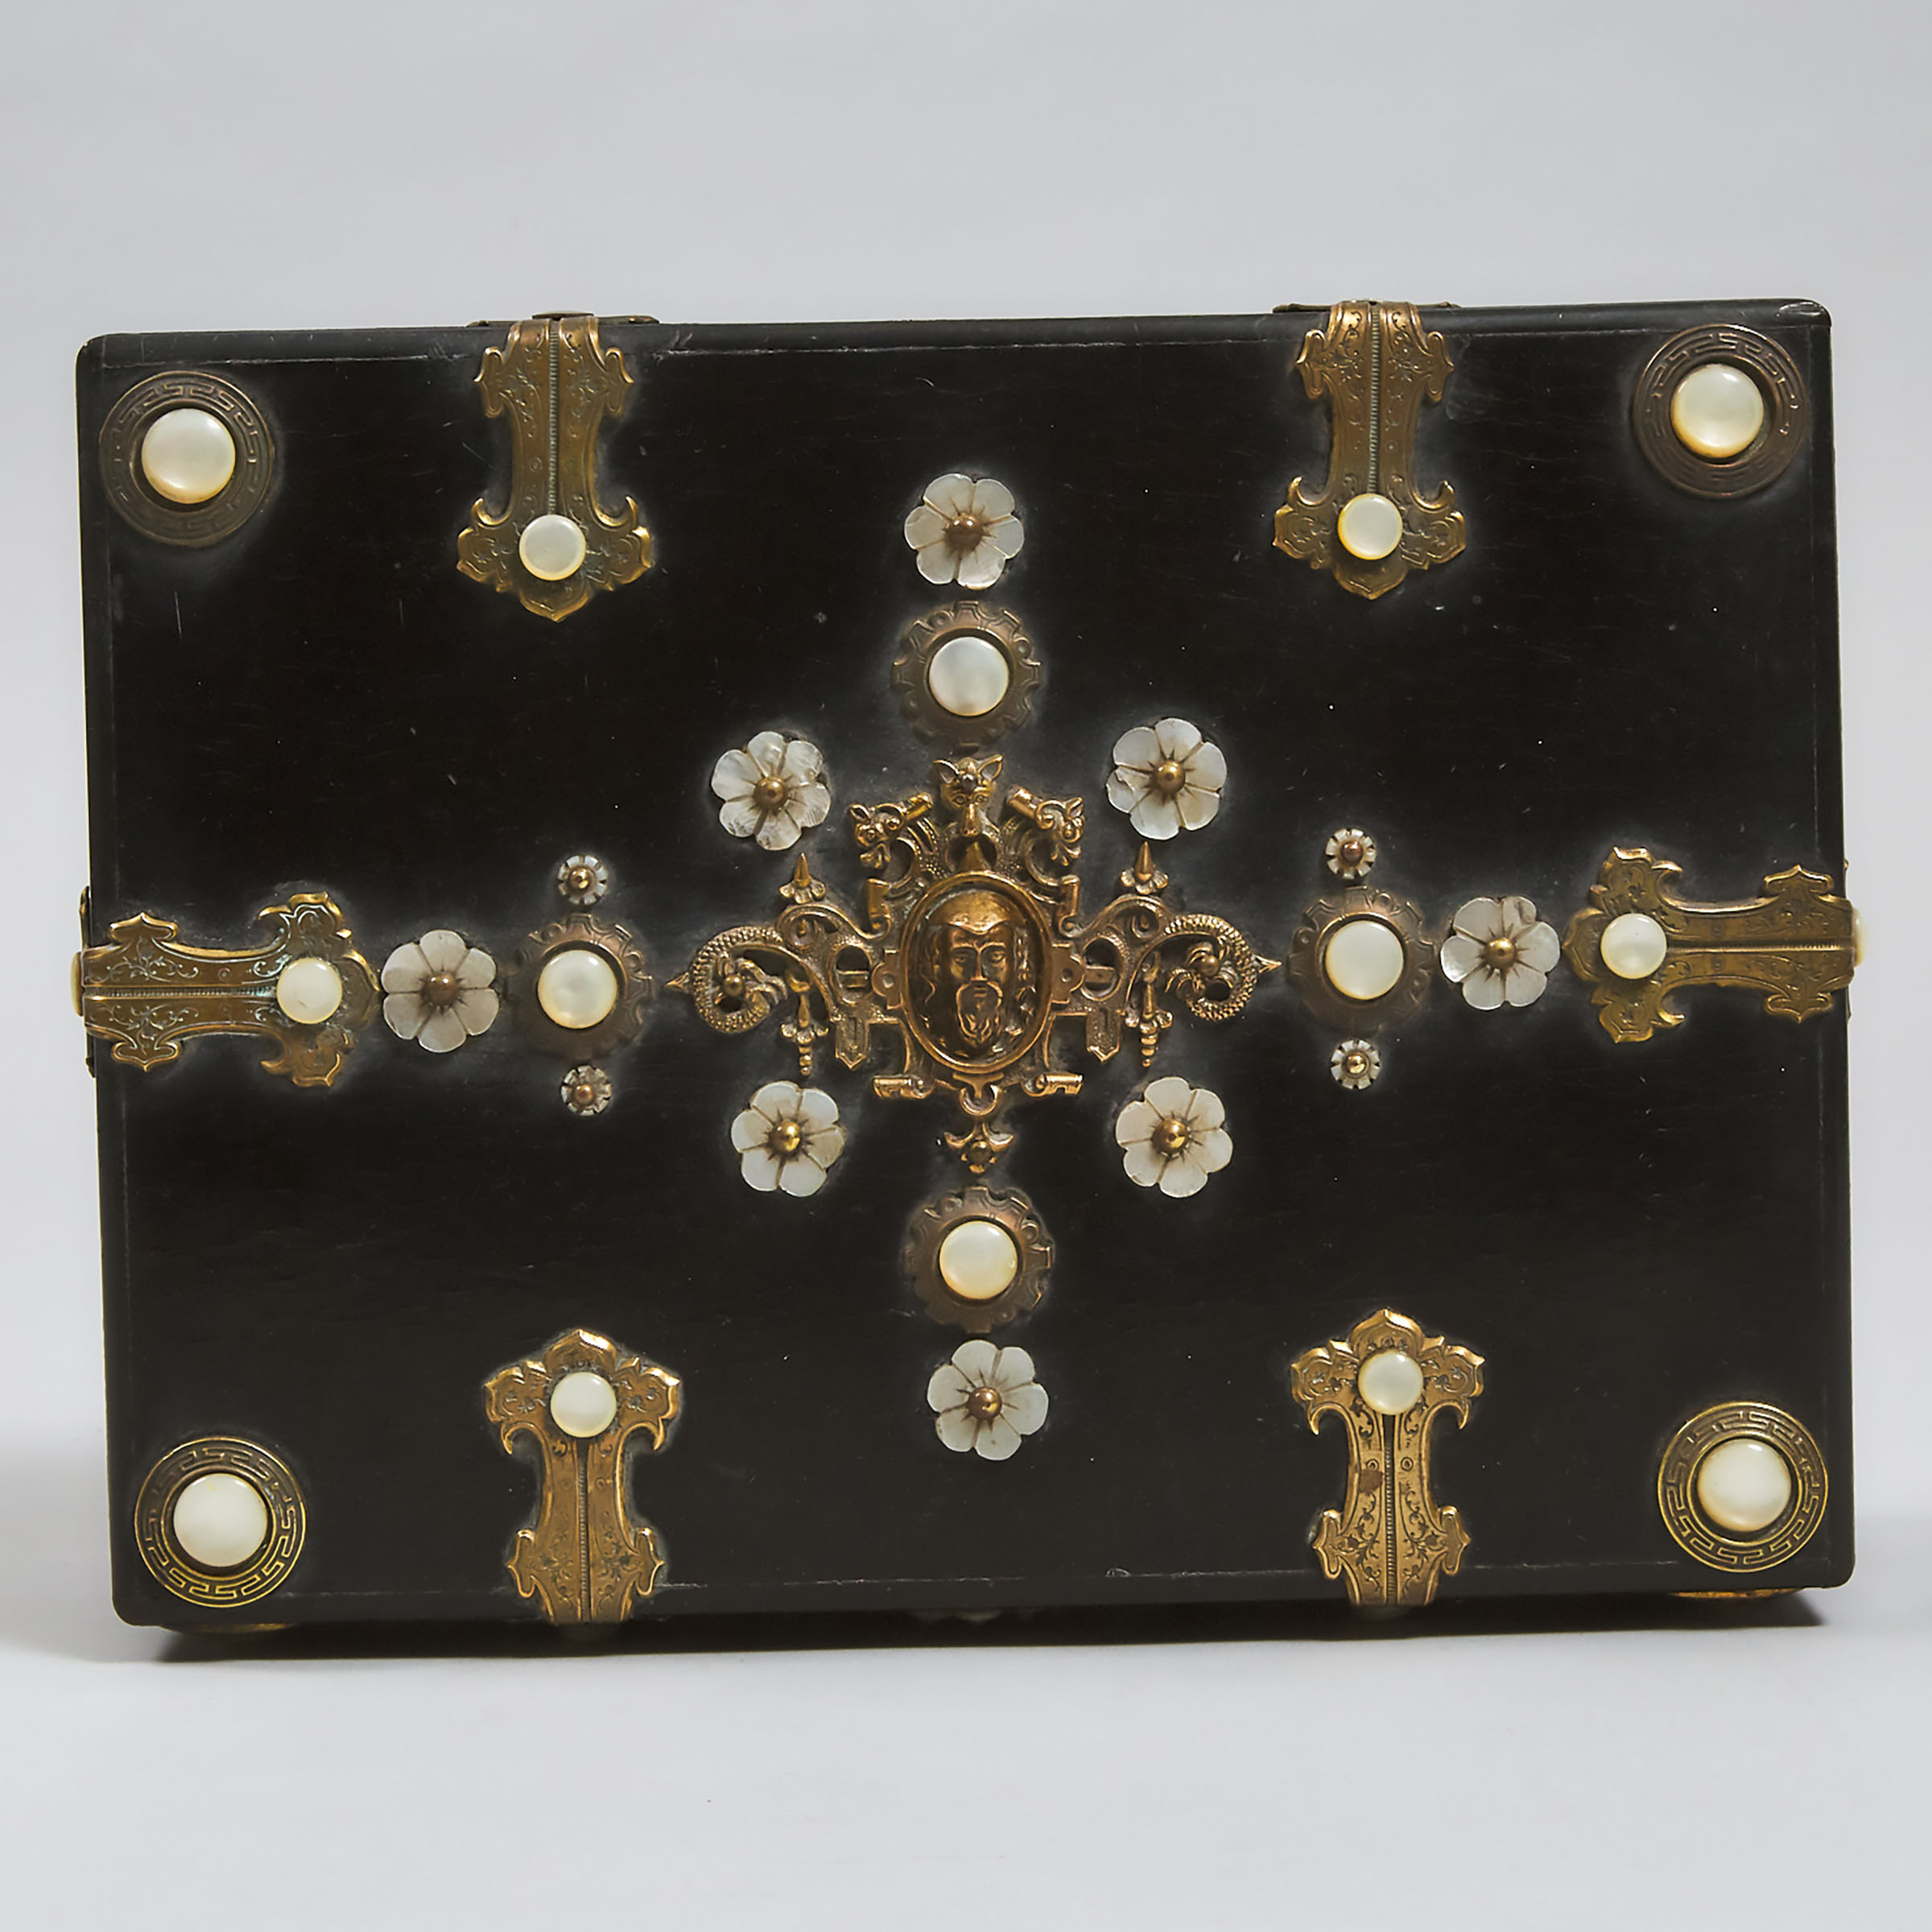 Victorian Renaissance Revival Brass and Mother-of-Pearl Mounted Black Lacquer Casket, mid 19th century